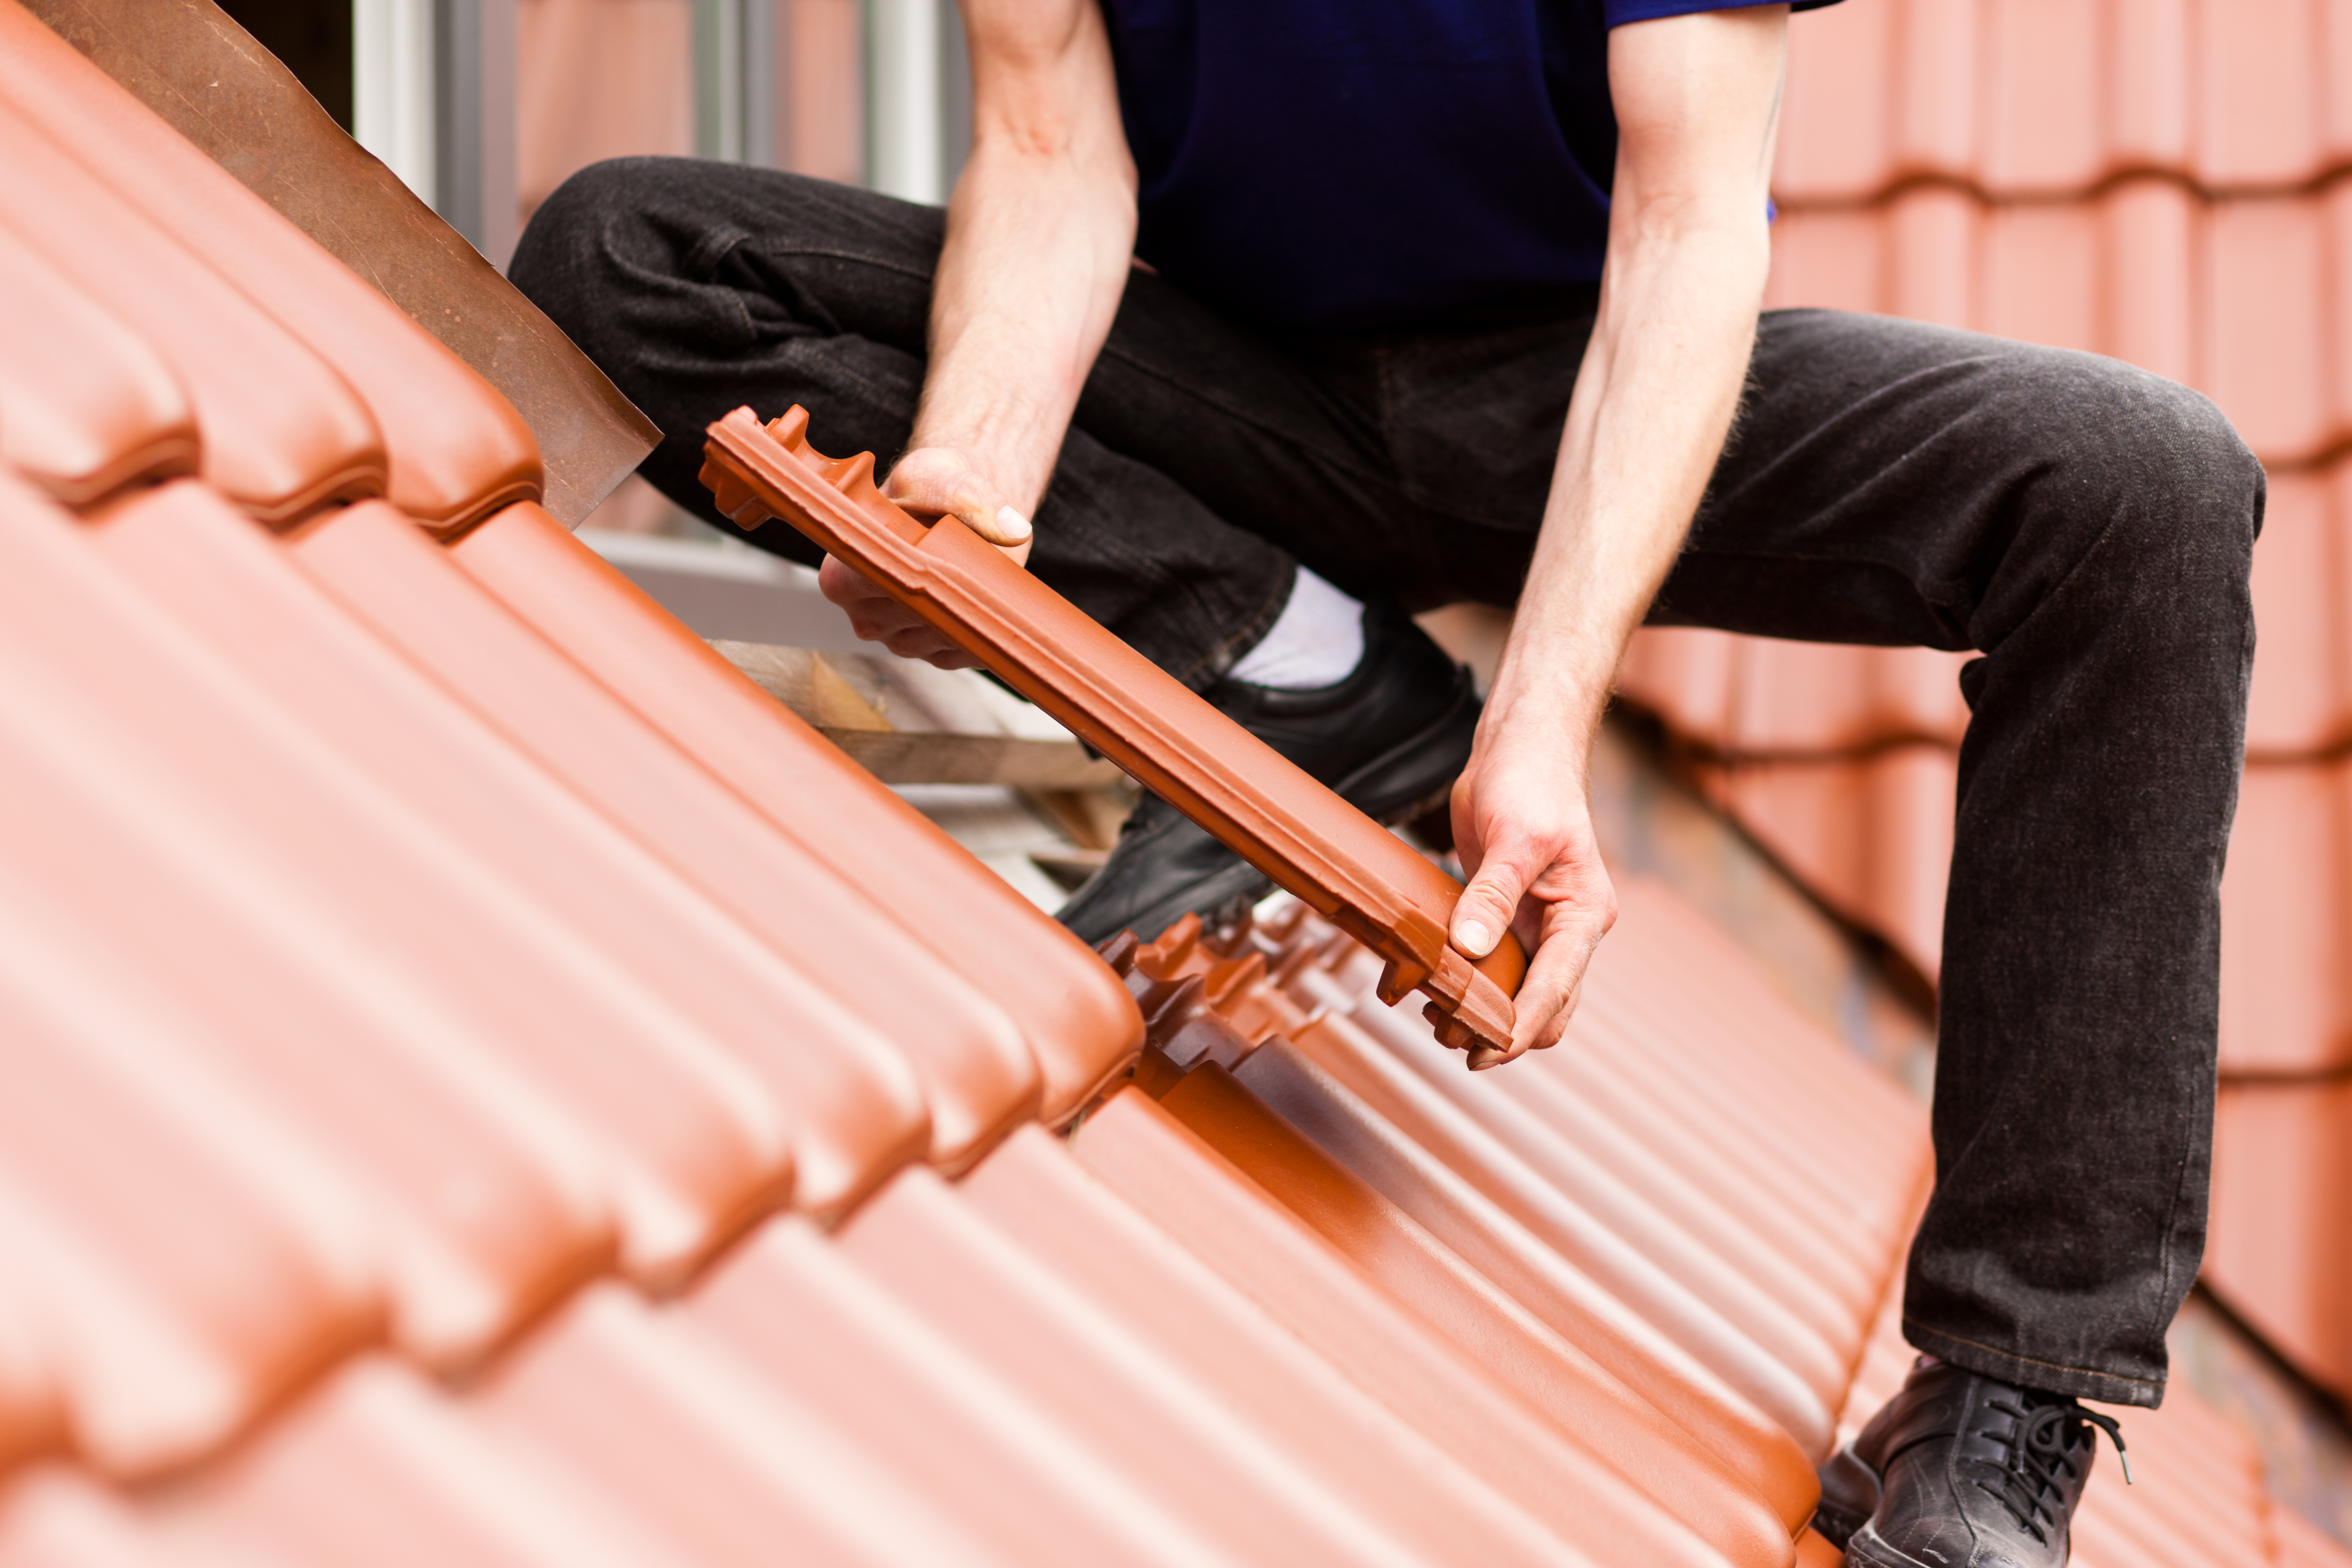 Roofing, construction worker standing on a roof covering it with tiles